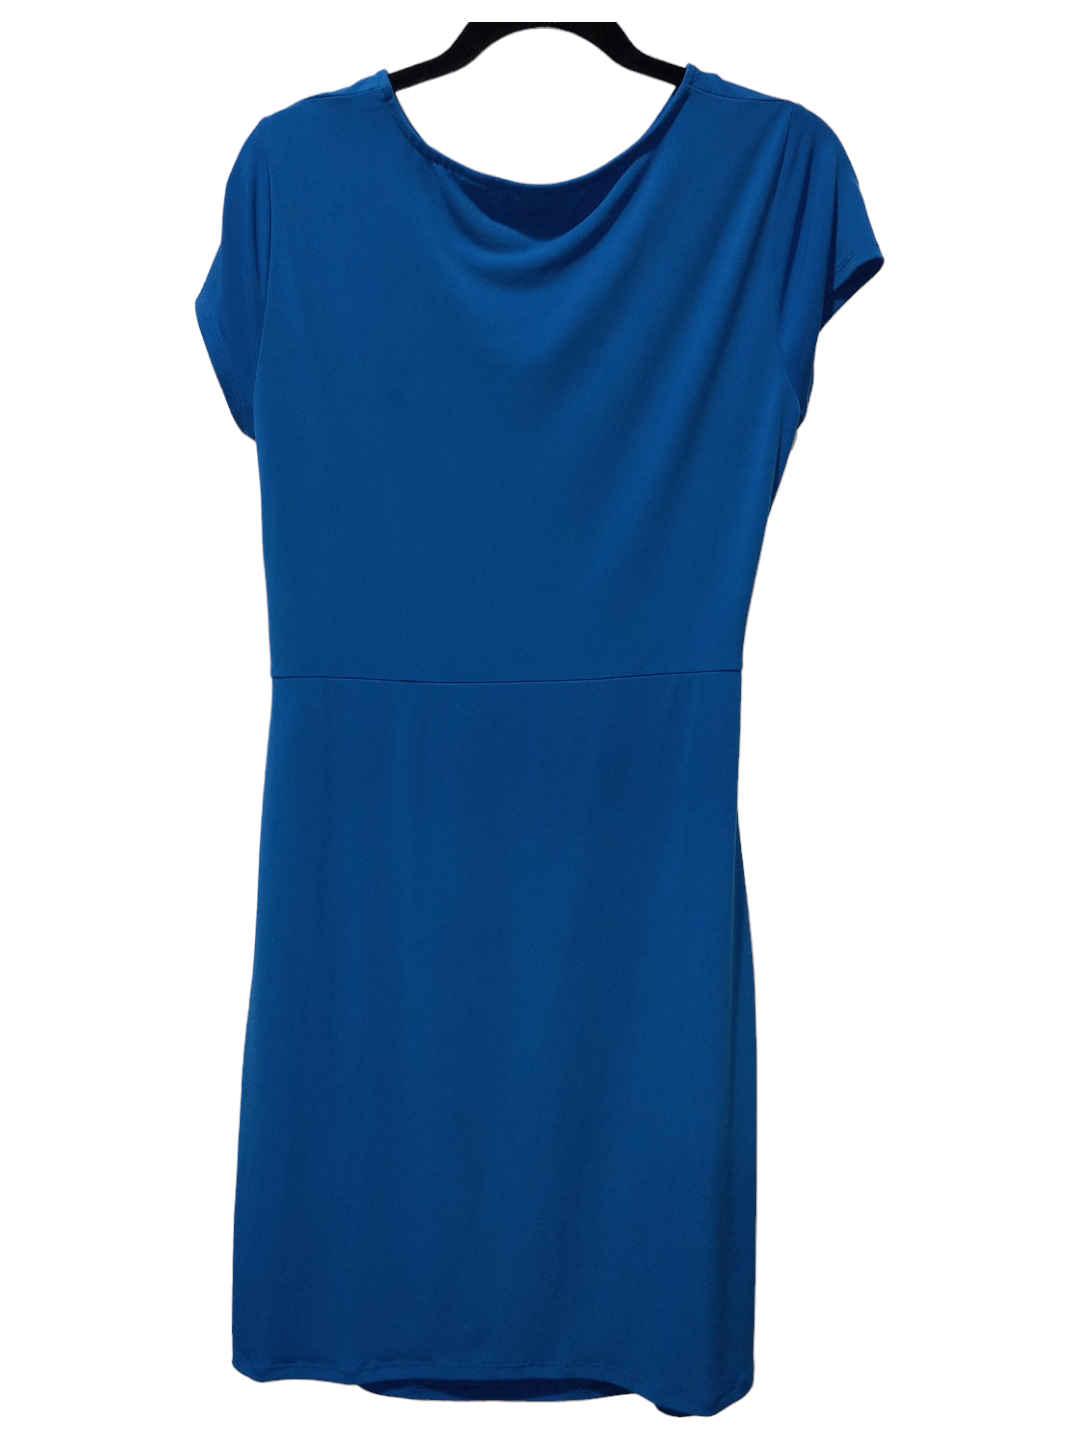 Blue Dress Party Midi New York And Co, Size M